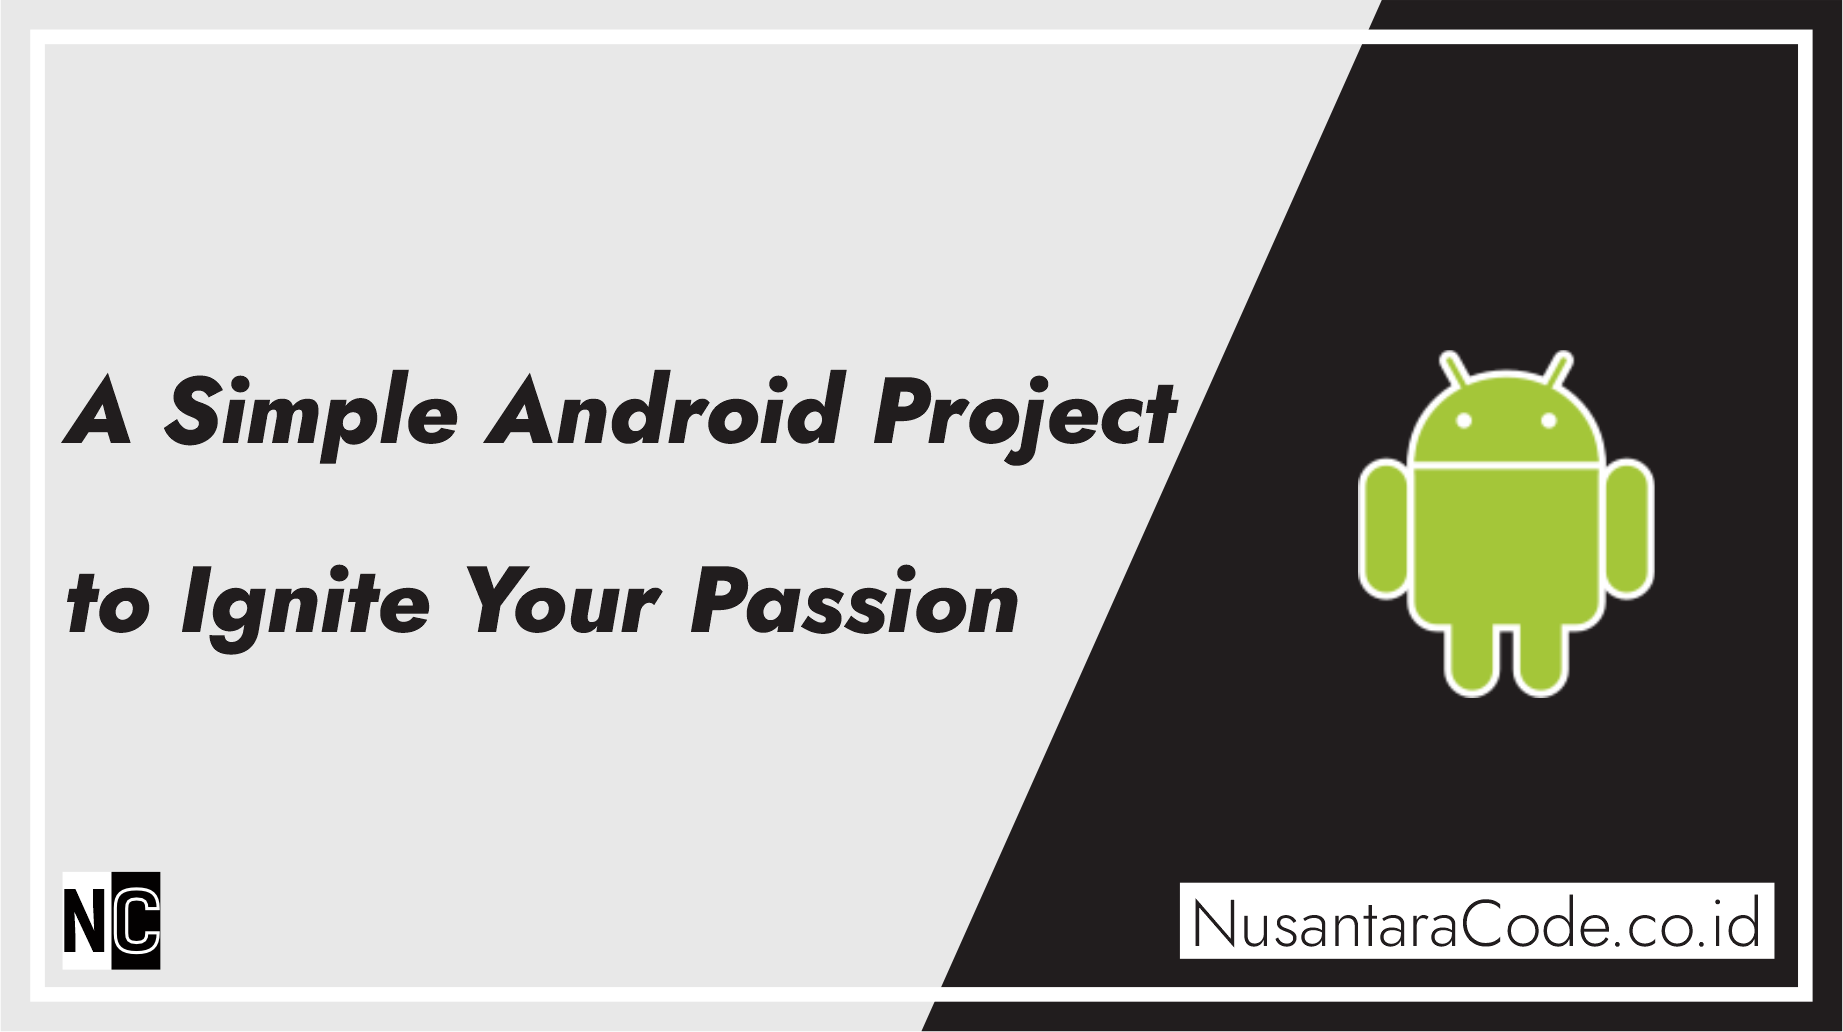 A Simple Android Project to Ignite Your Passion